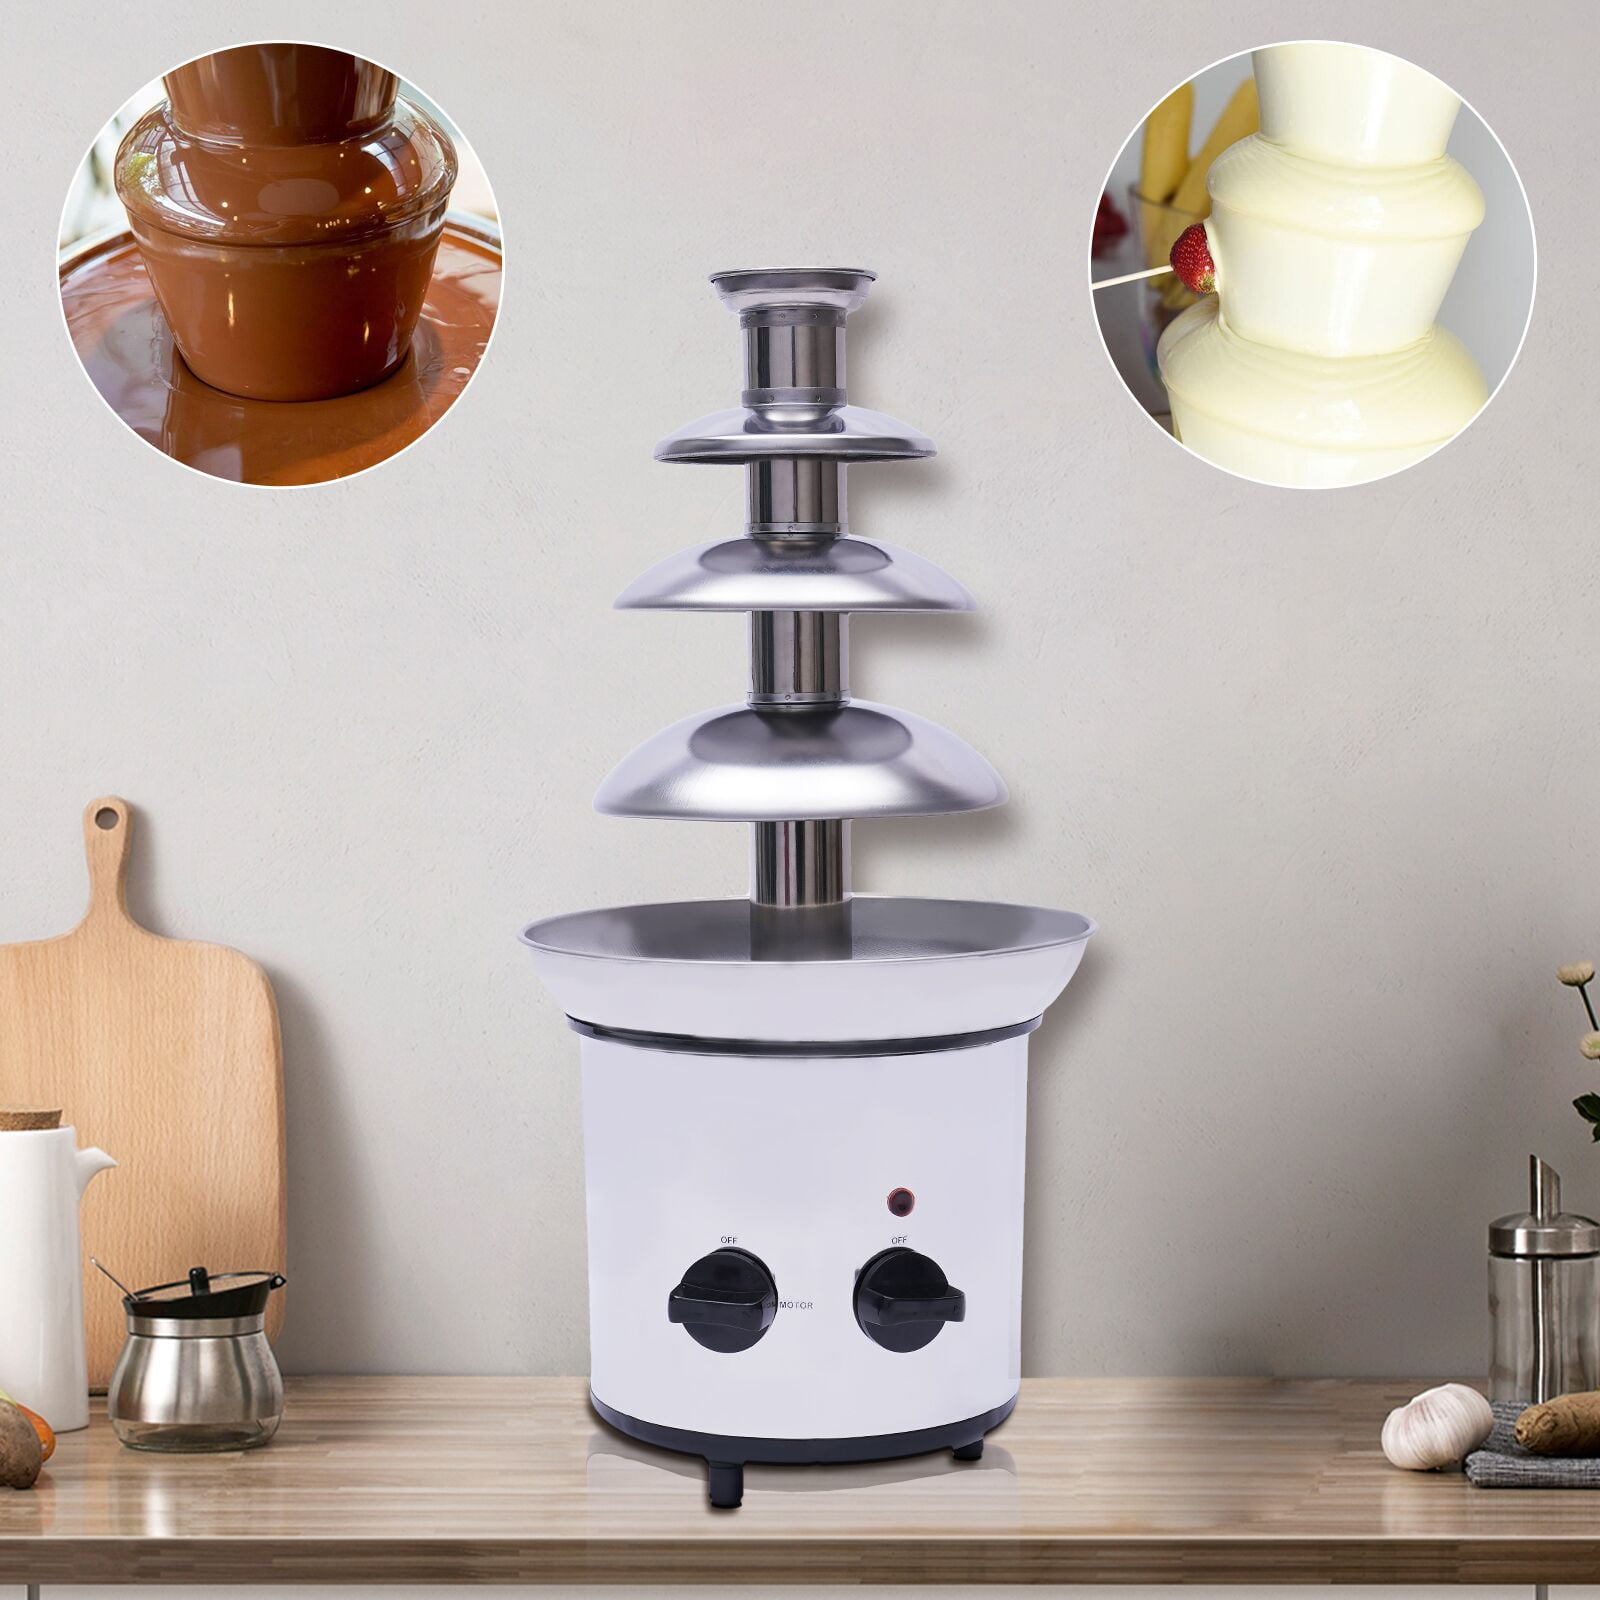 Commercial 110V 4 Tiers Chocolate Fondue Fountain,Stainless Steel Adjust Luxury Hot Chocolate Cream Melting Machine 170W Chocolate Fondue Fountain Fondue Maker Silver for Christmas Birthday Party 